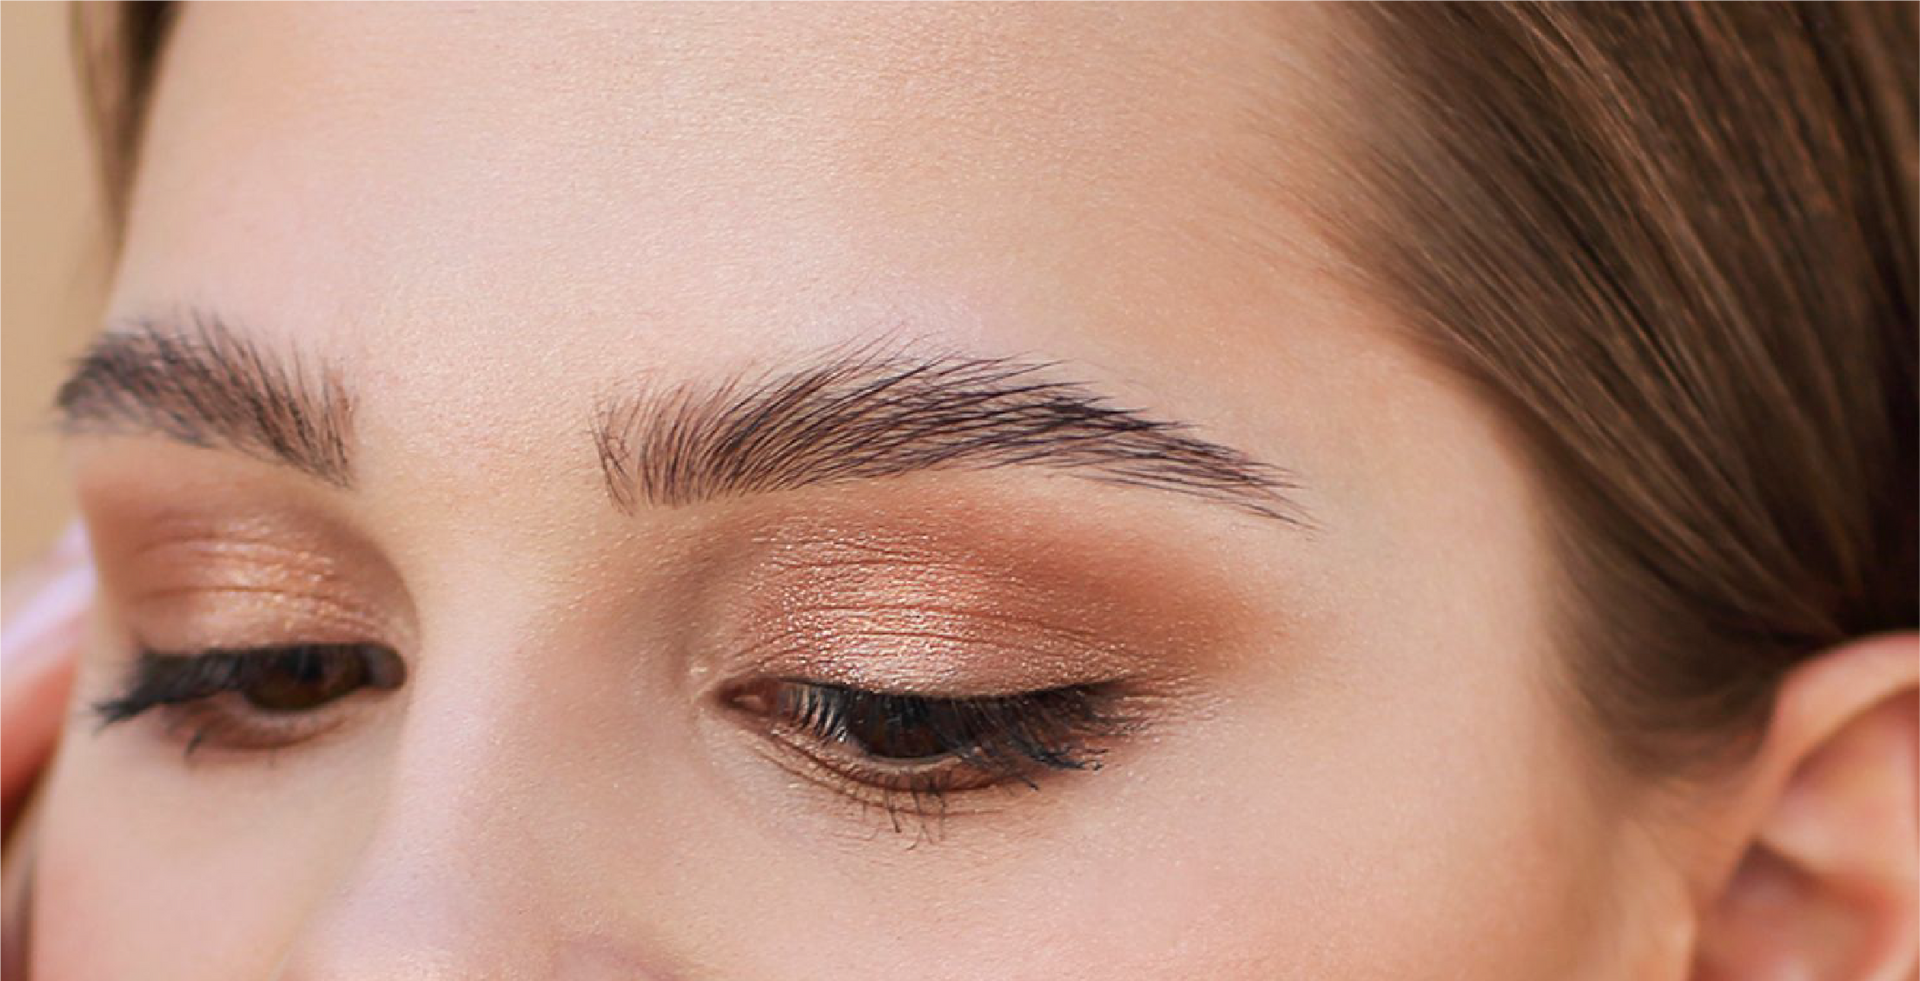 A close up of a woman 's eye with makeup on her eyebrows.